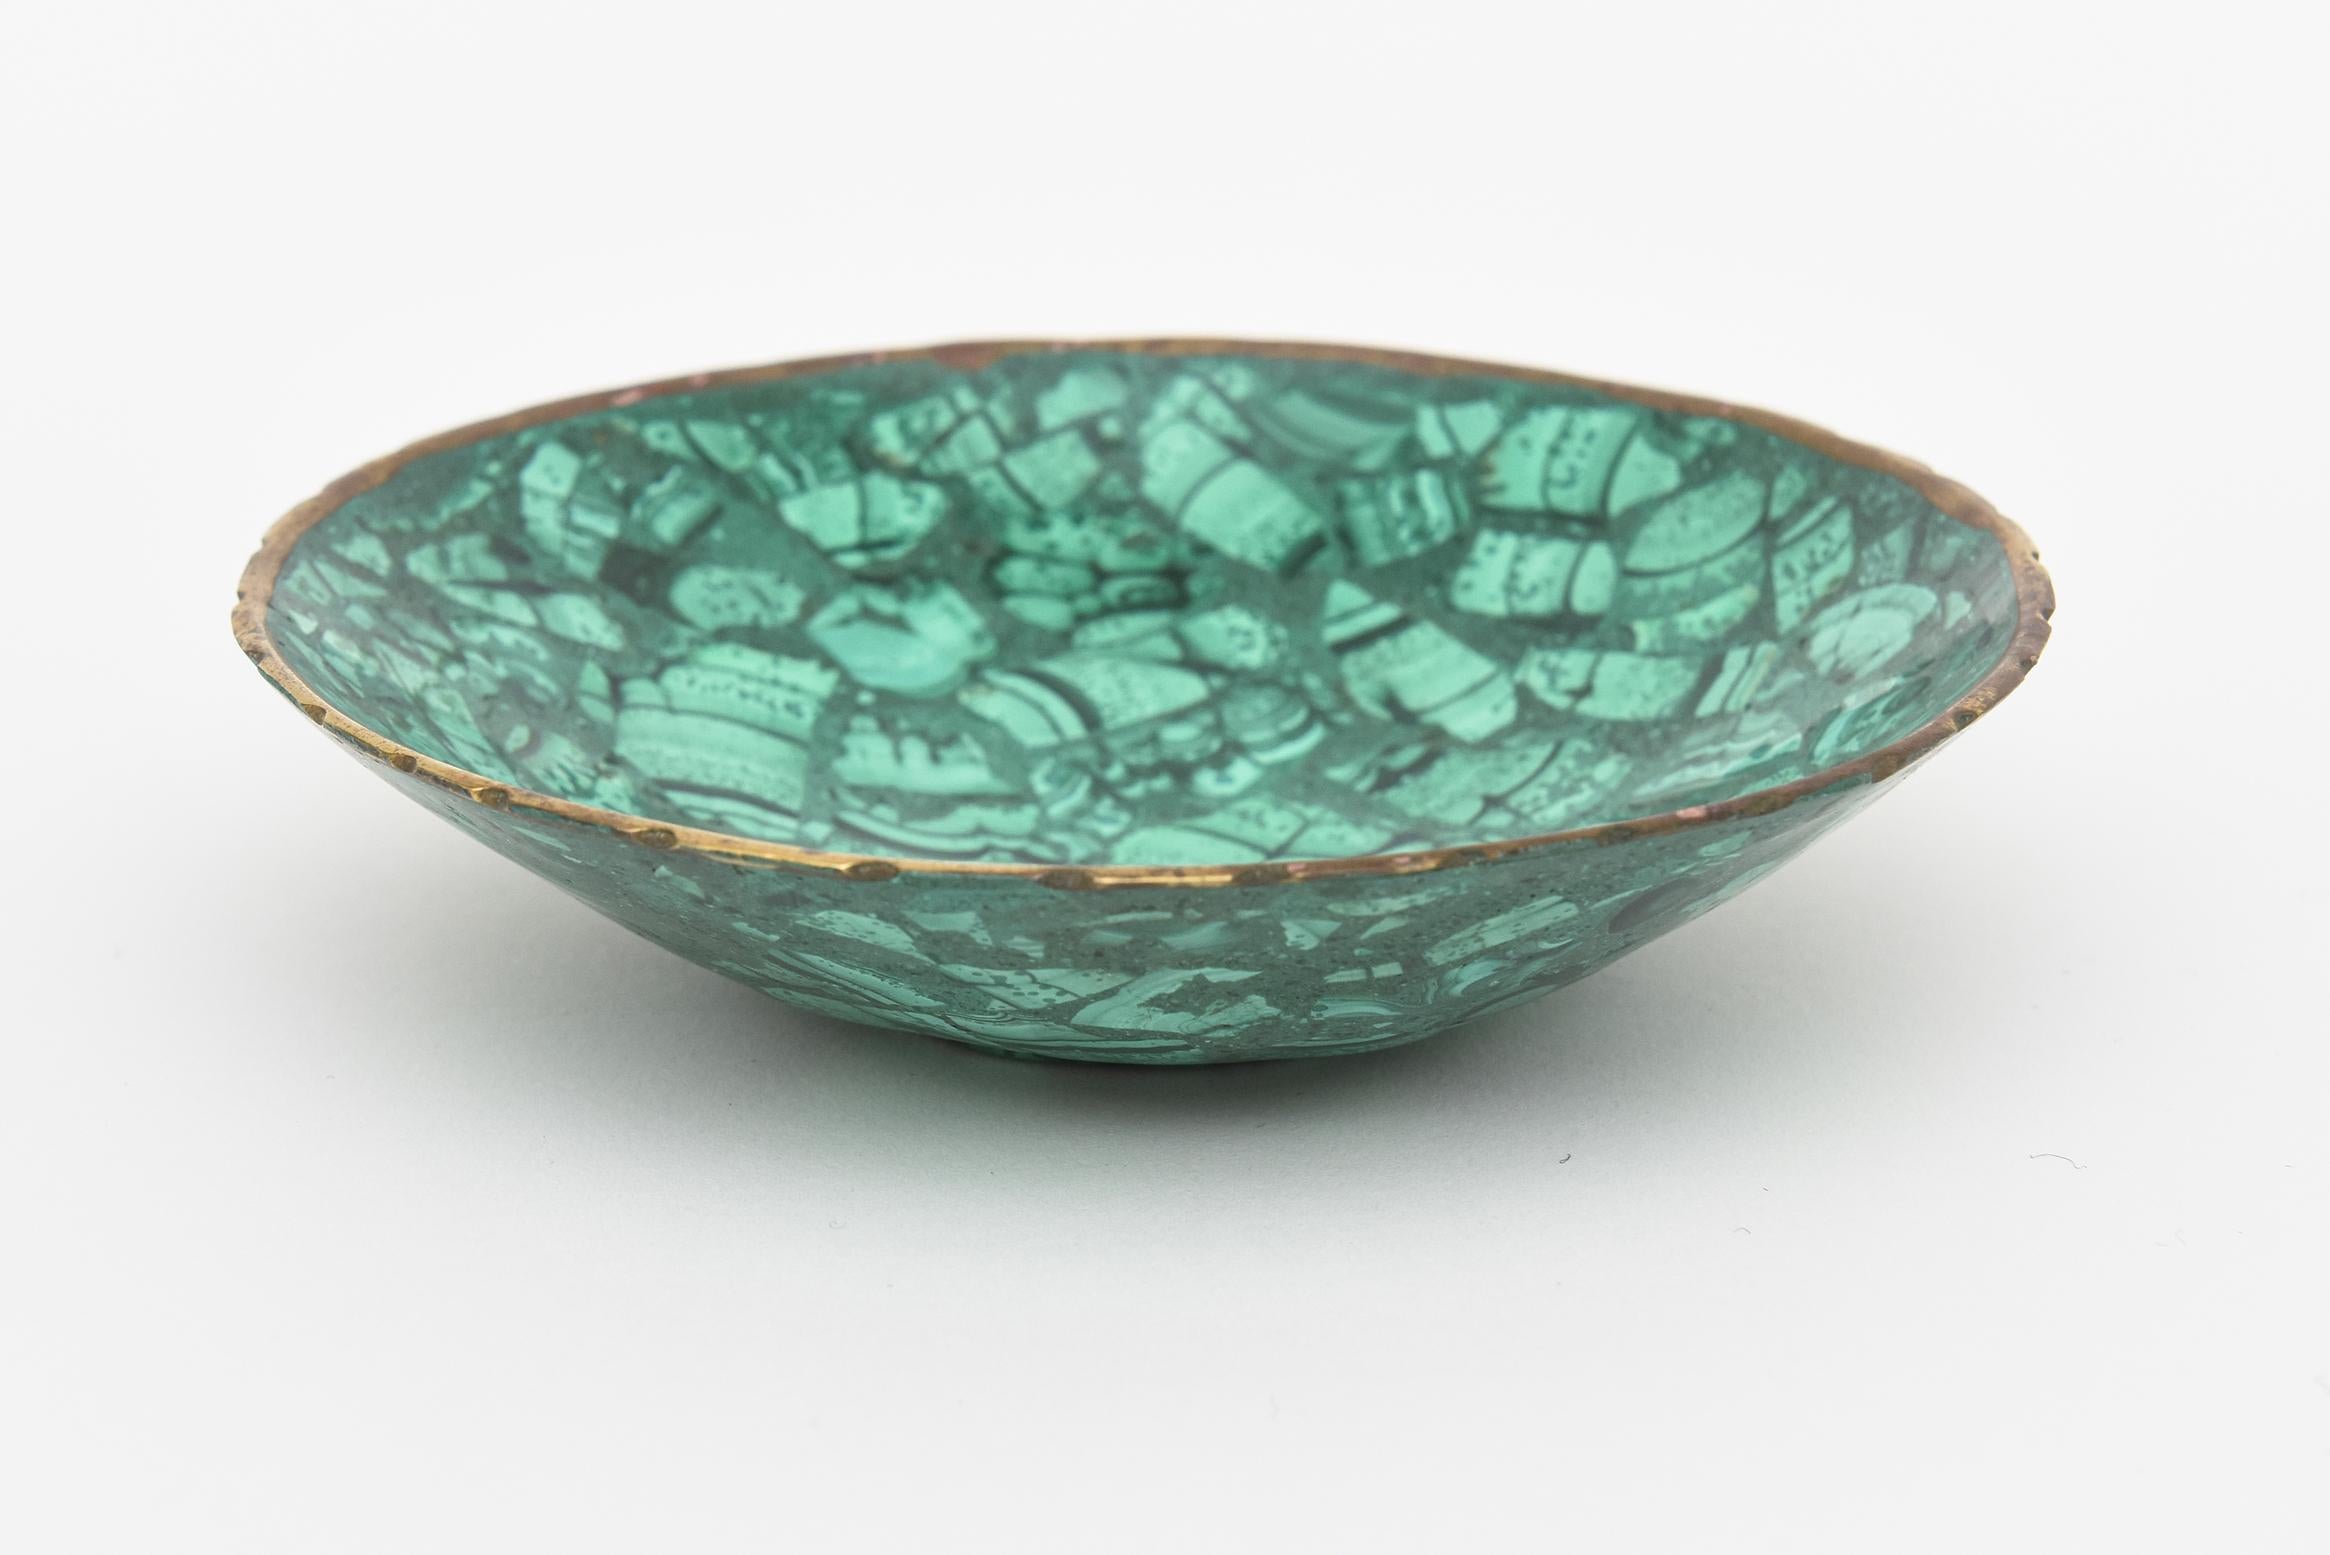 This lovely vintage malachite decorative bowl is from the 70's. It has the brass trim surround. Great desk accessory or ring bowl.